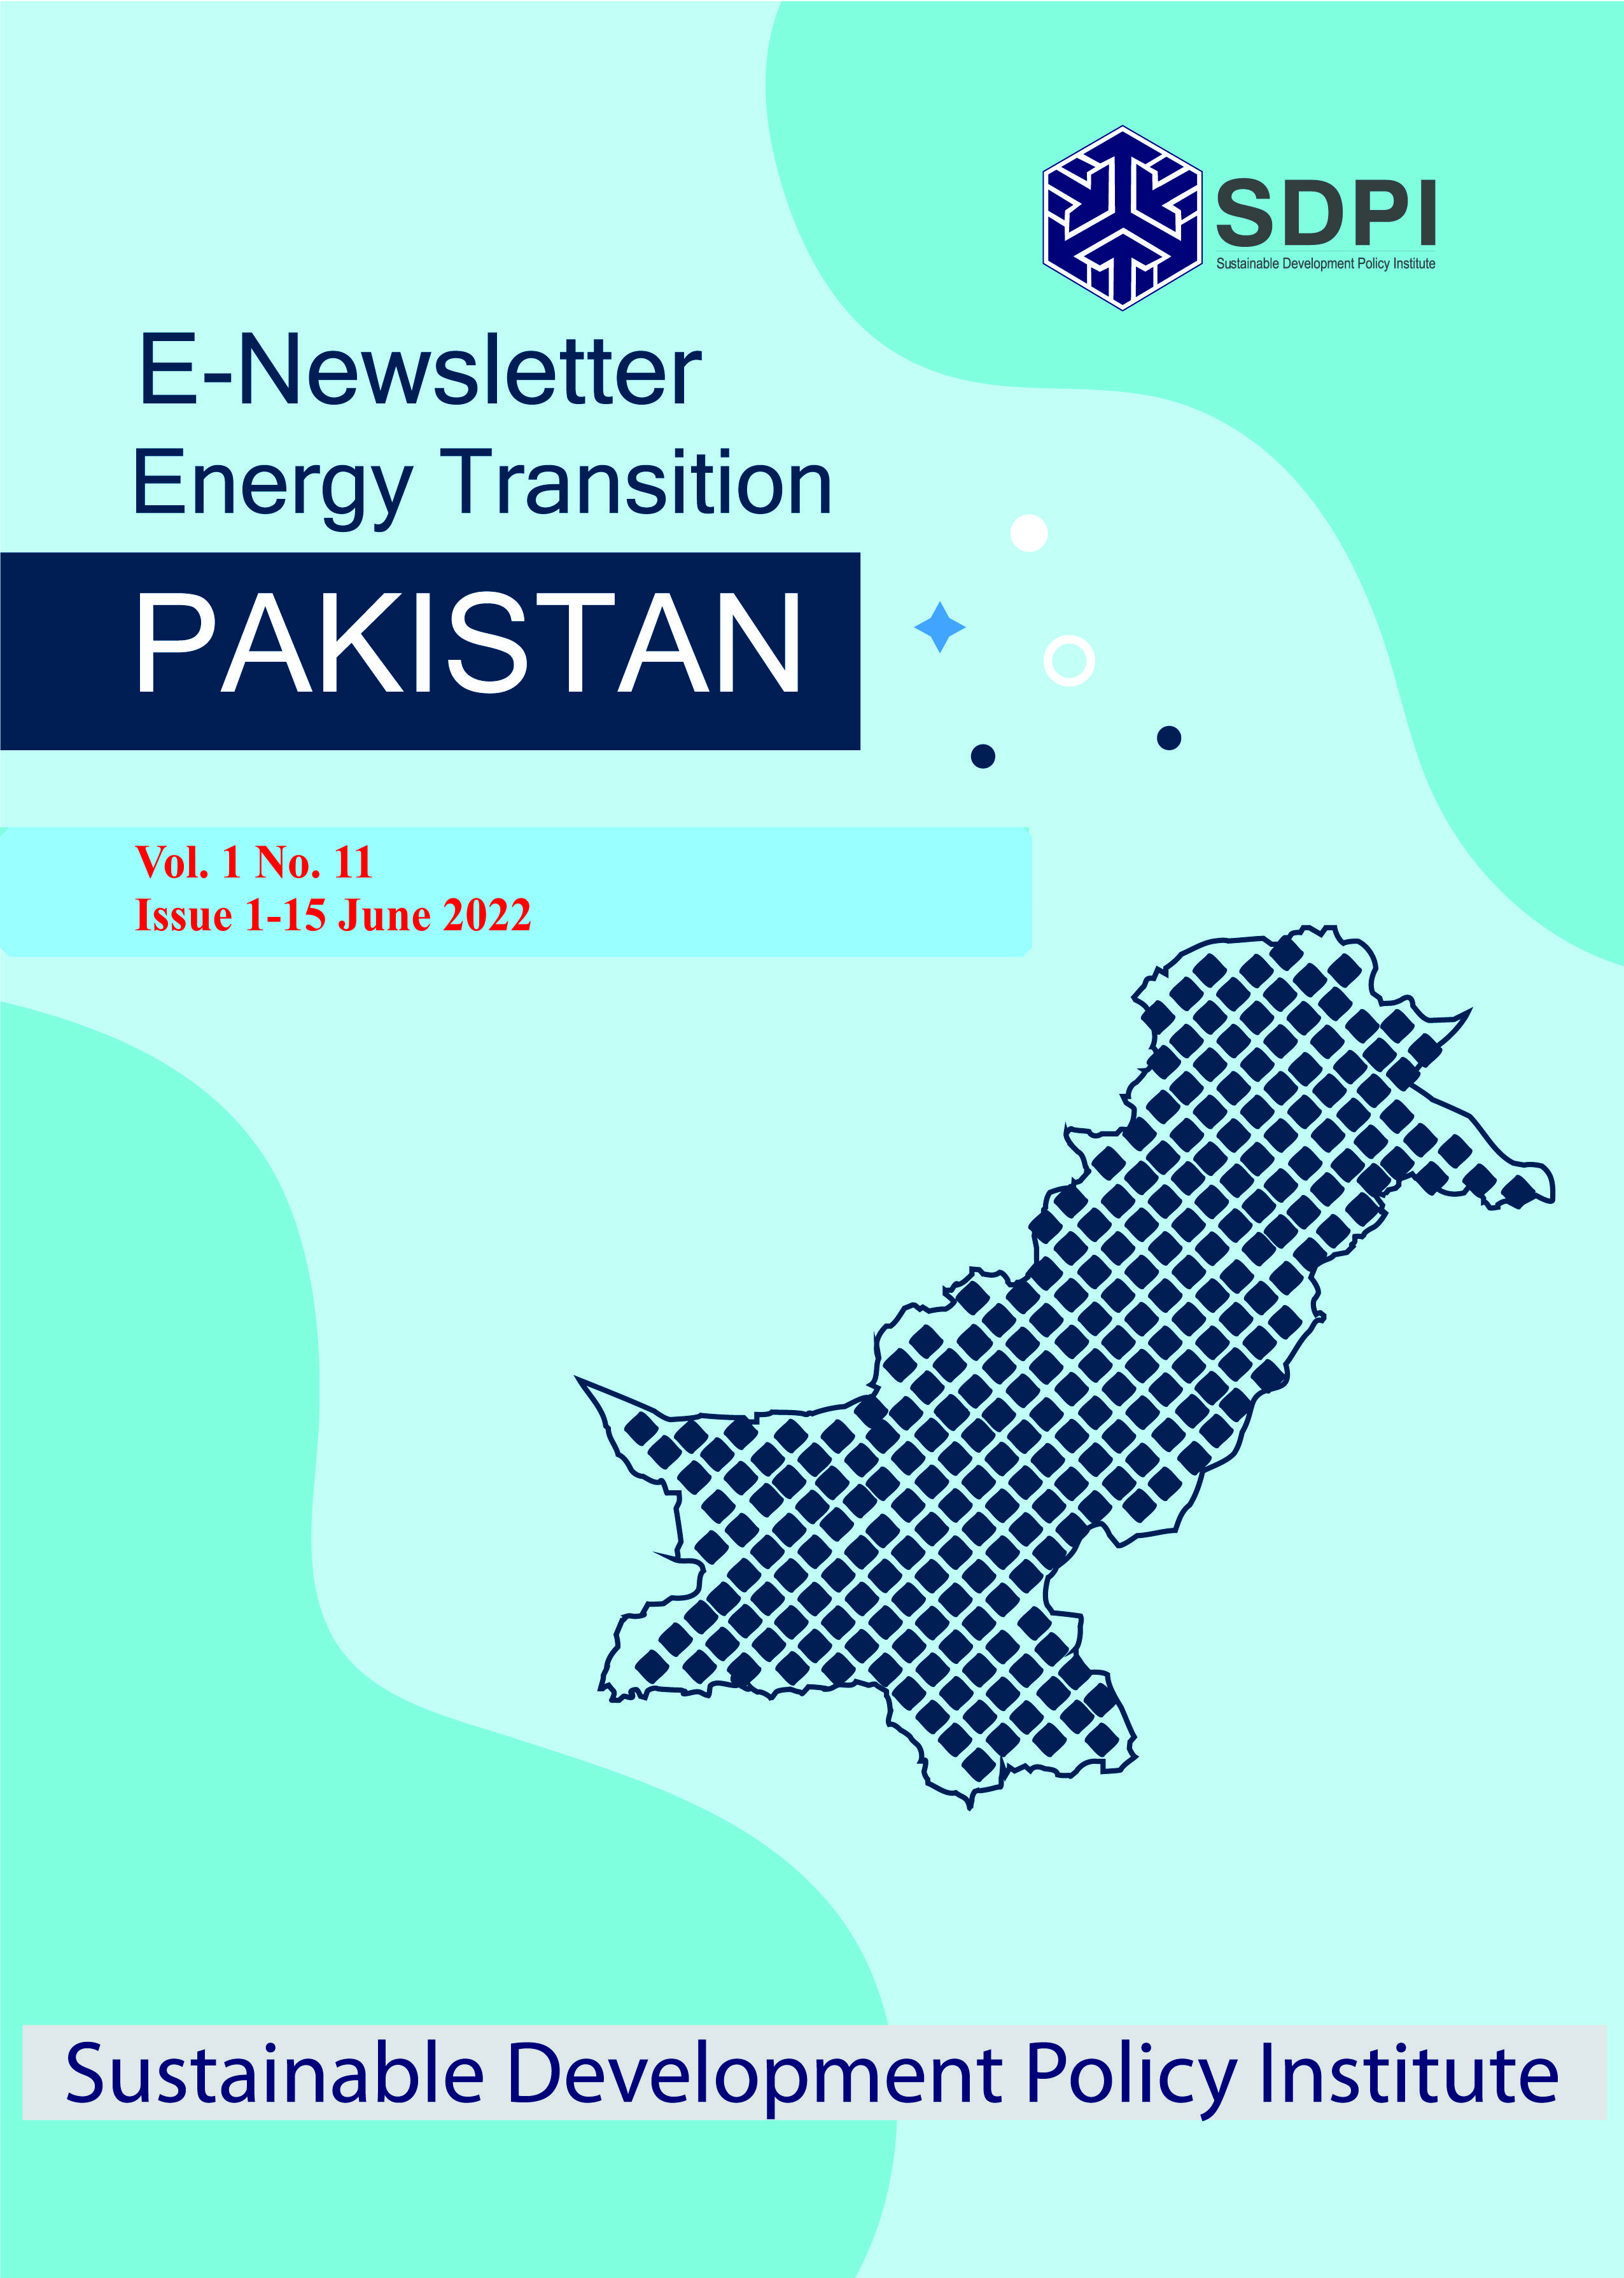 E-Newsletter on Energy Transition Pakistan Vol. 1. No. 11 Issue 1-15 June 2022